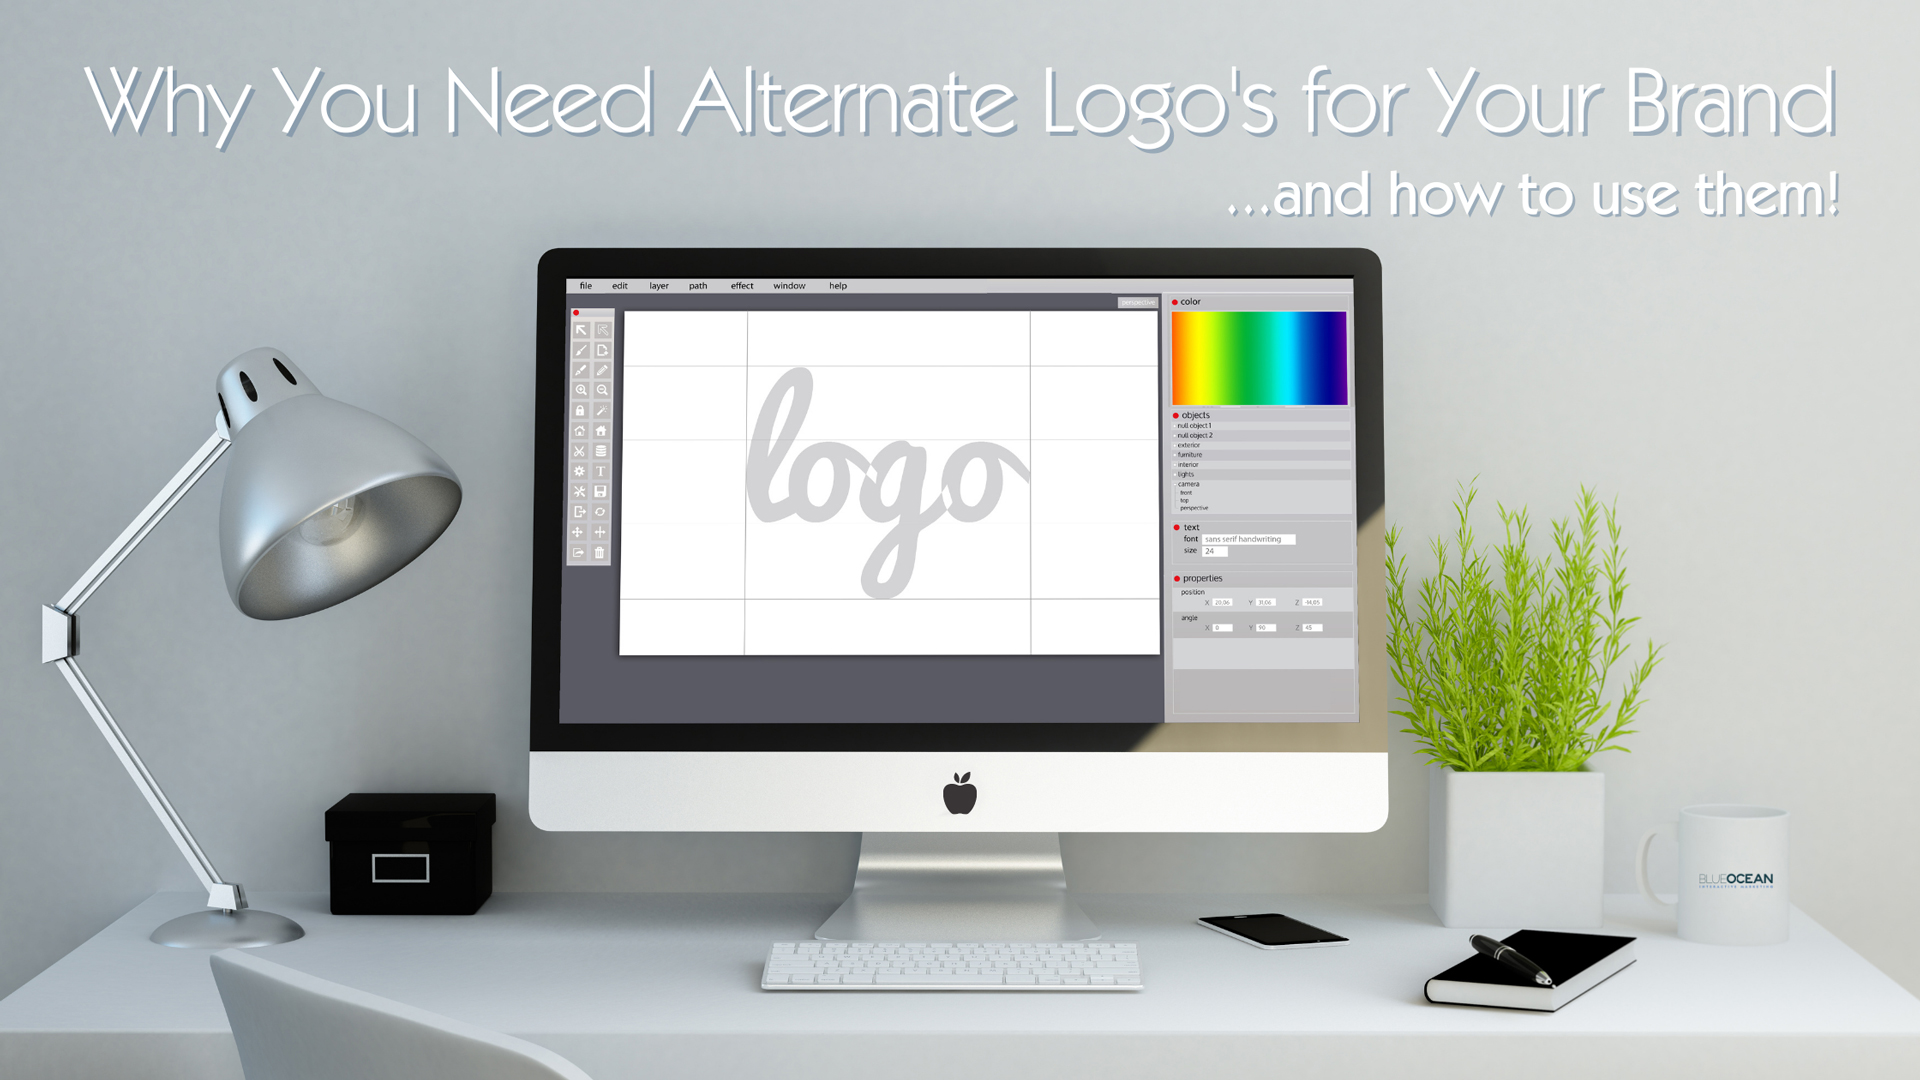 blue-ocean-interactive-marketging-blog-december-2020-why-you-need-aternate-logos-for-your-brand